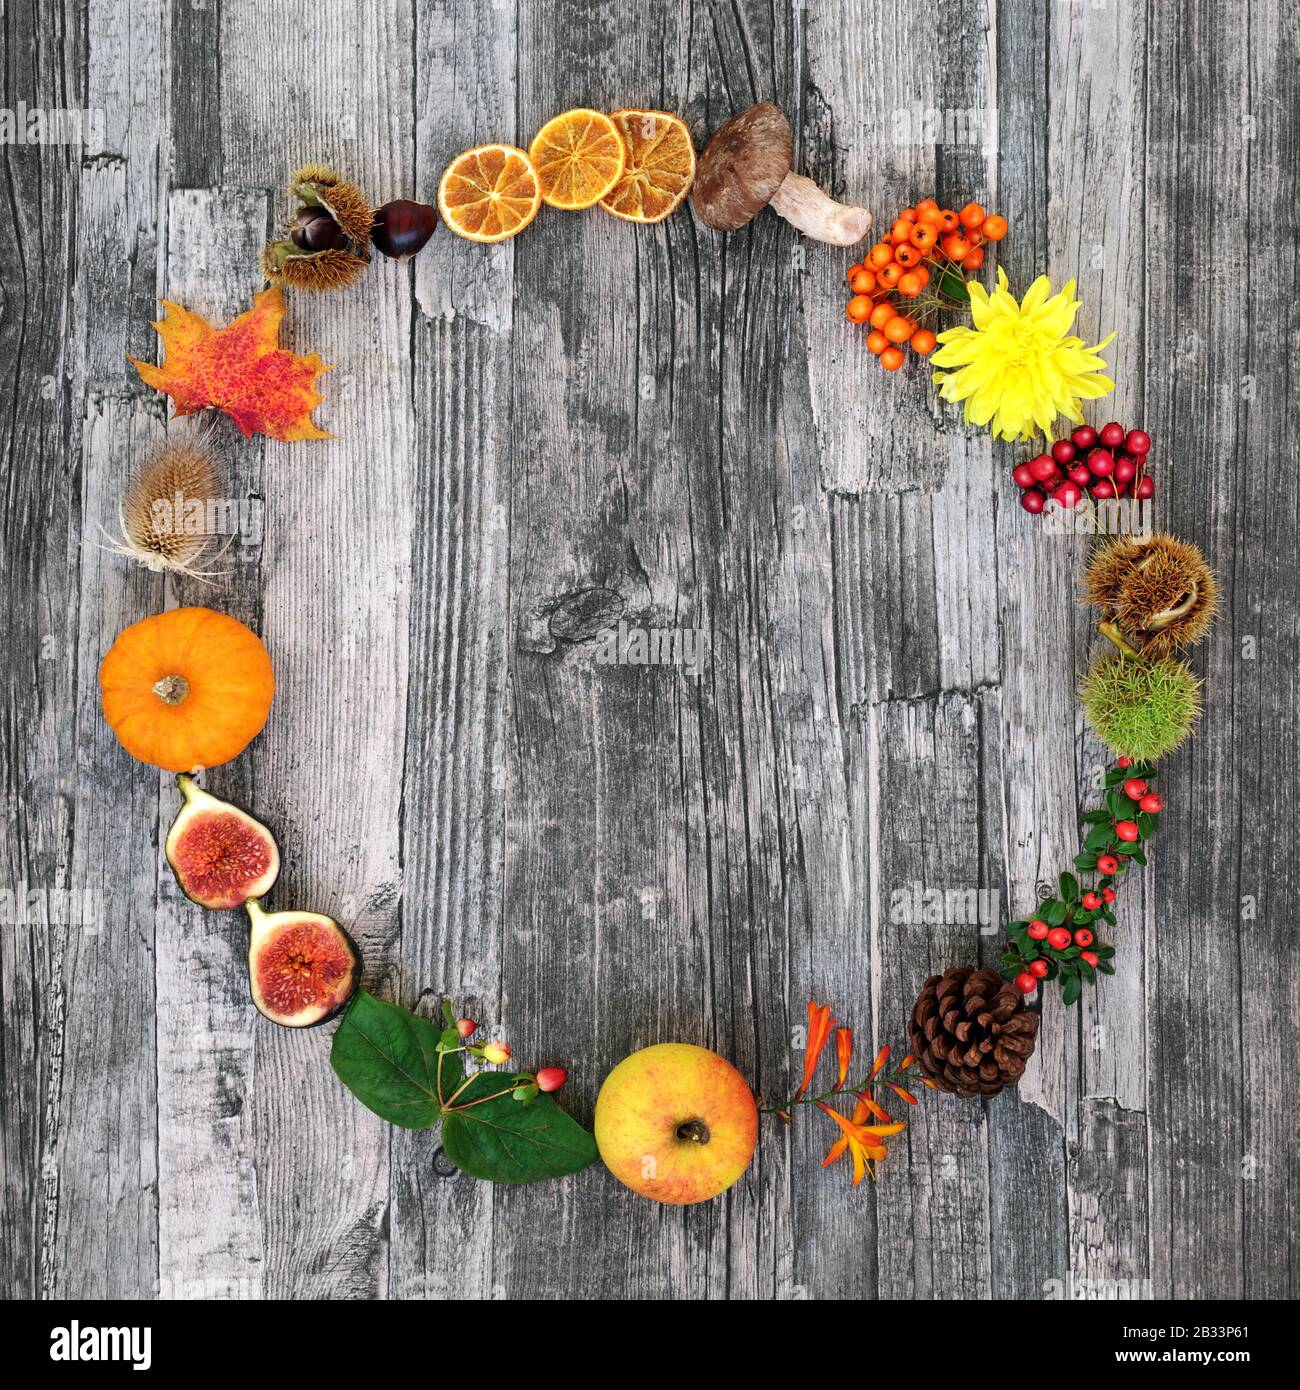 Autumn wreath harvest festival composition with a variety of natural flora & food on rustic wood background. Stock Photo